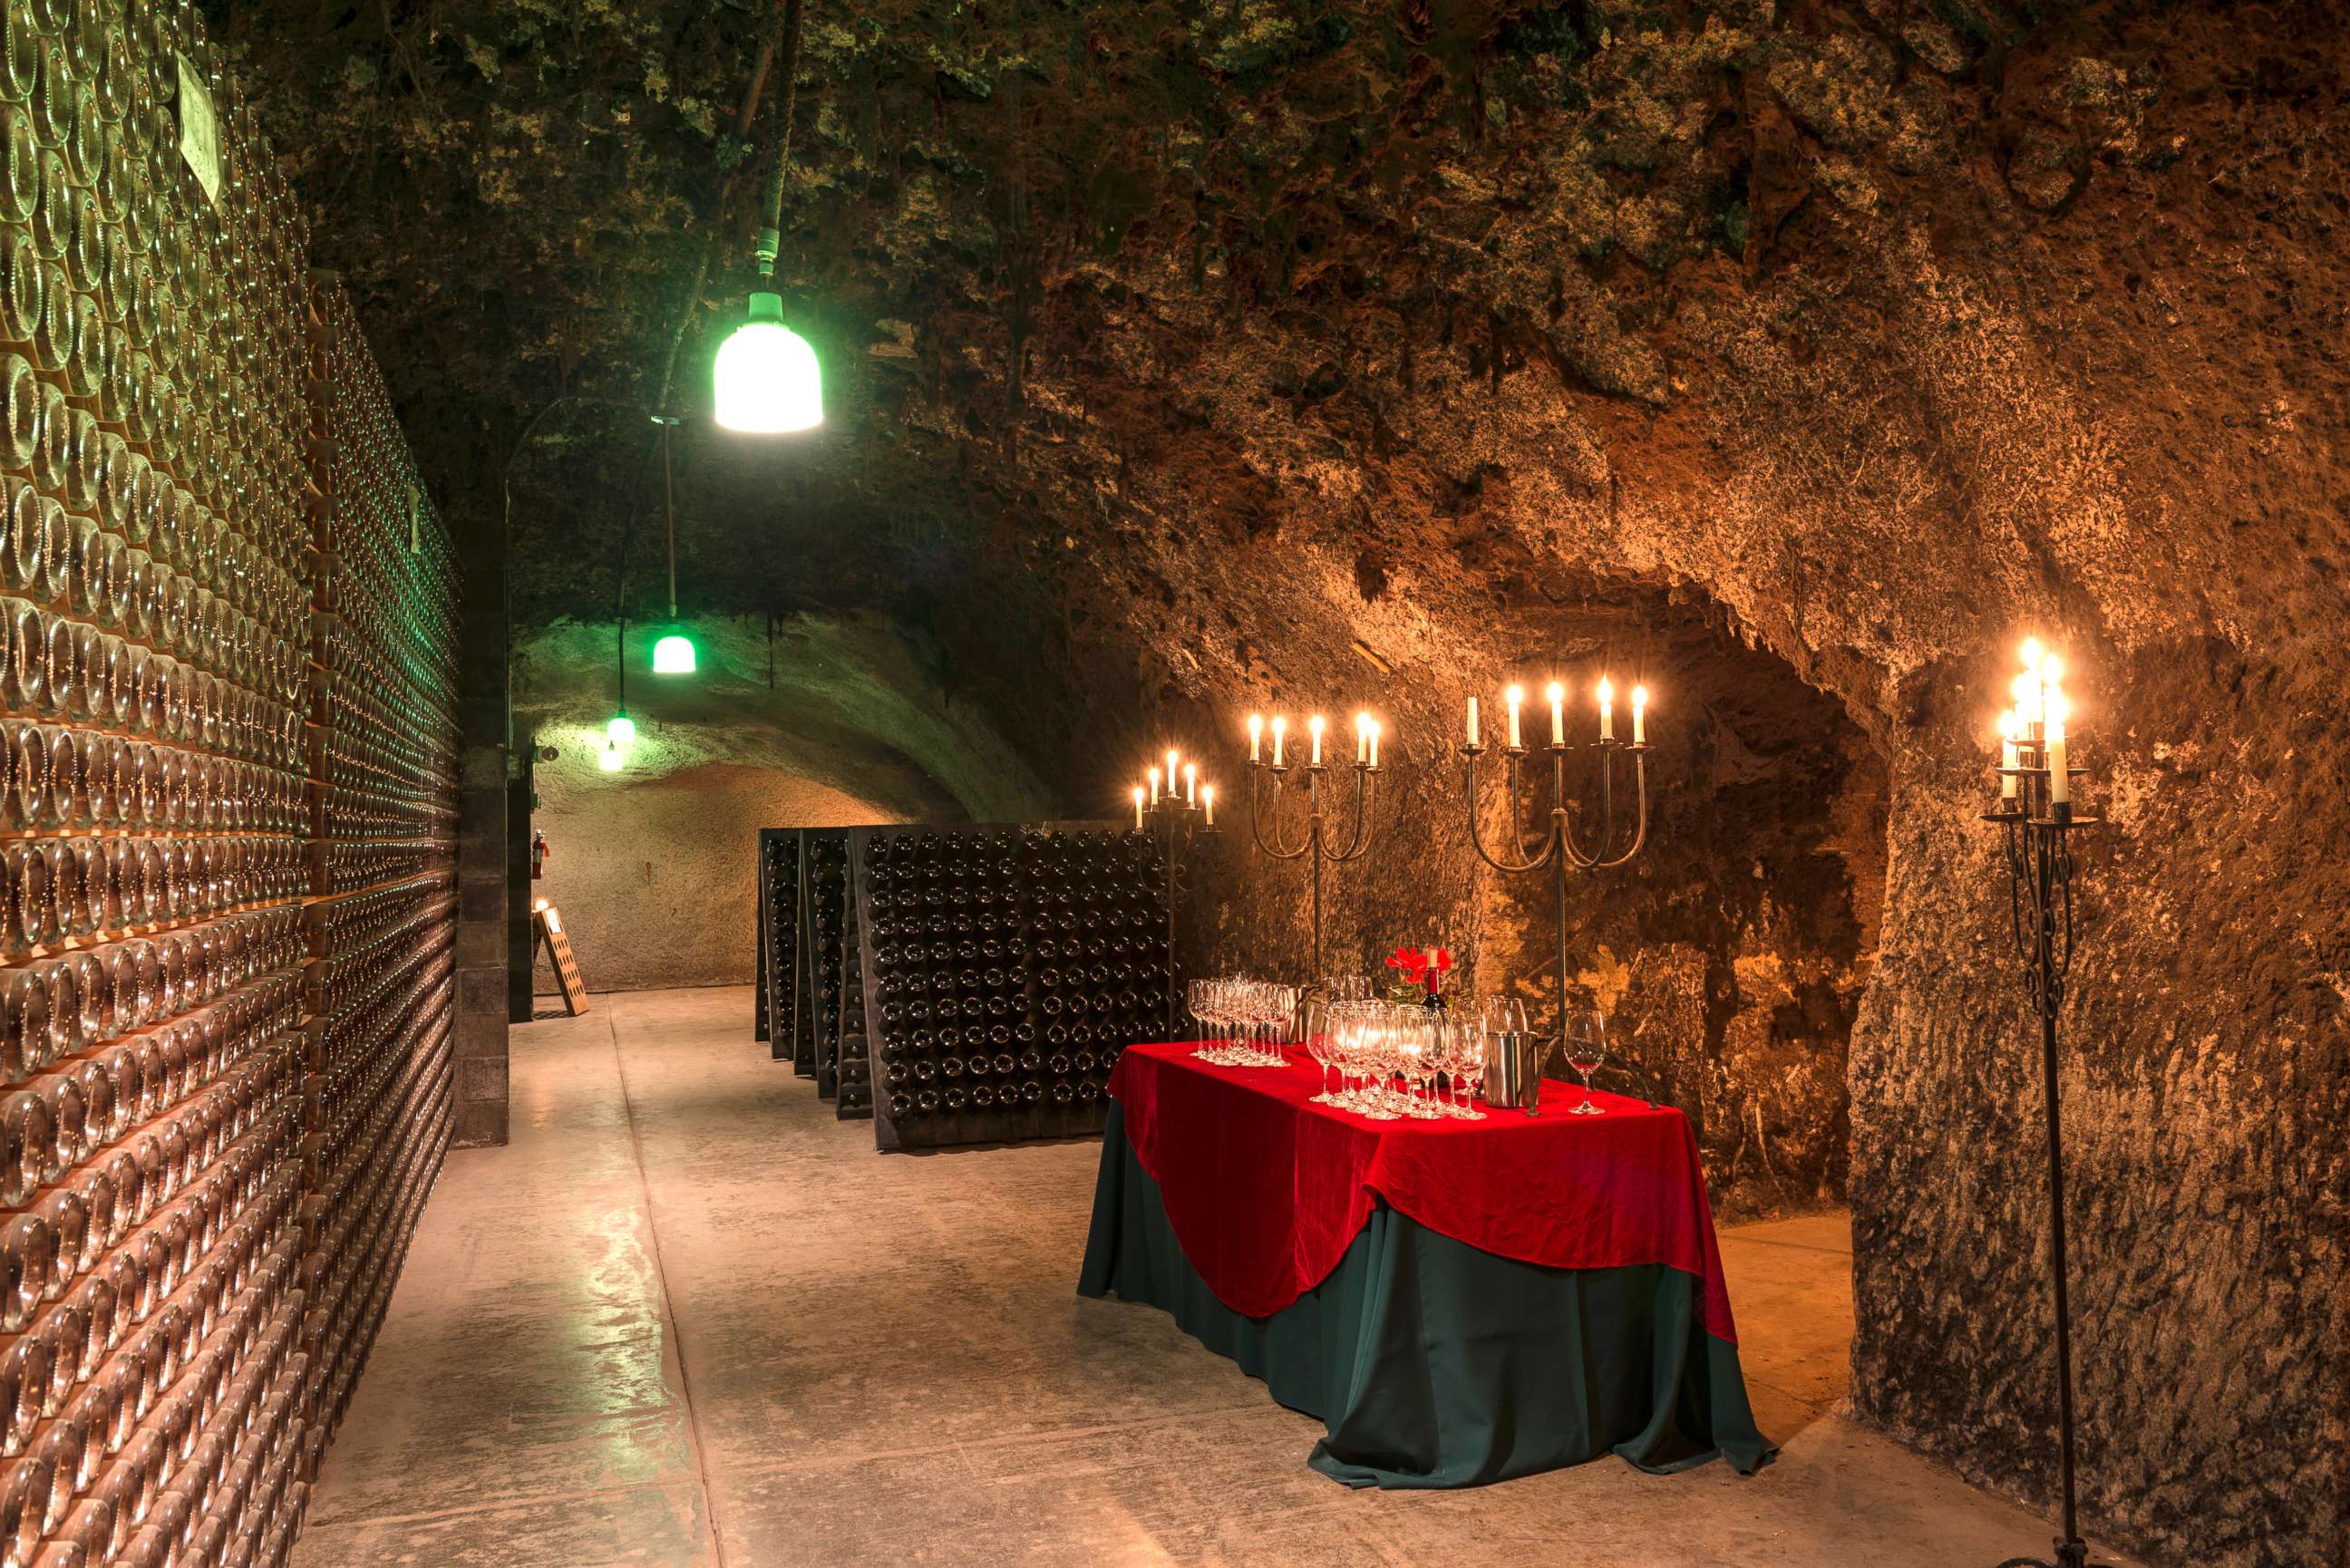 PHOTO: One of the wine-cellar caves at the Schramsberg Vineyard winery in California Napa Valley, Dec. 31, 2012.